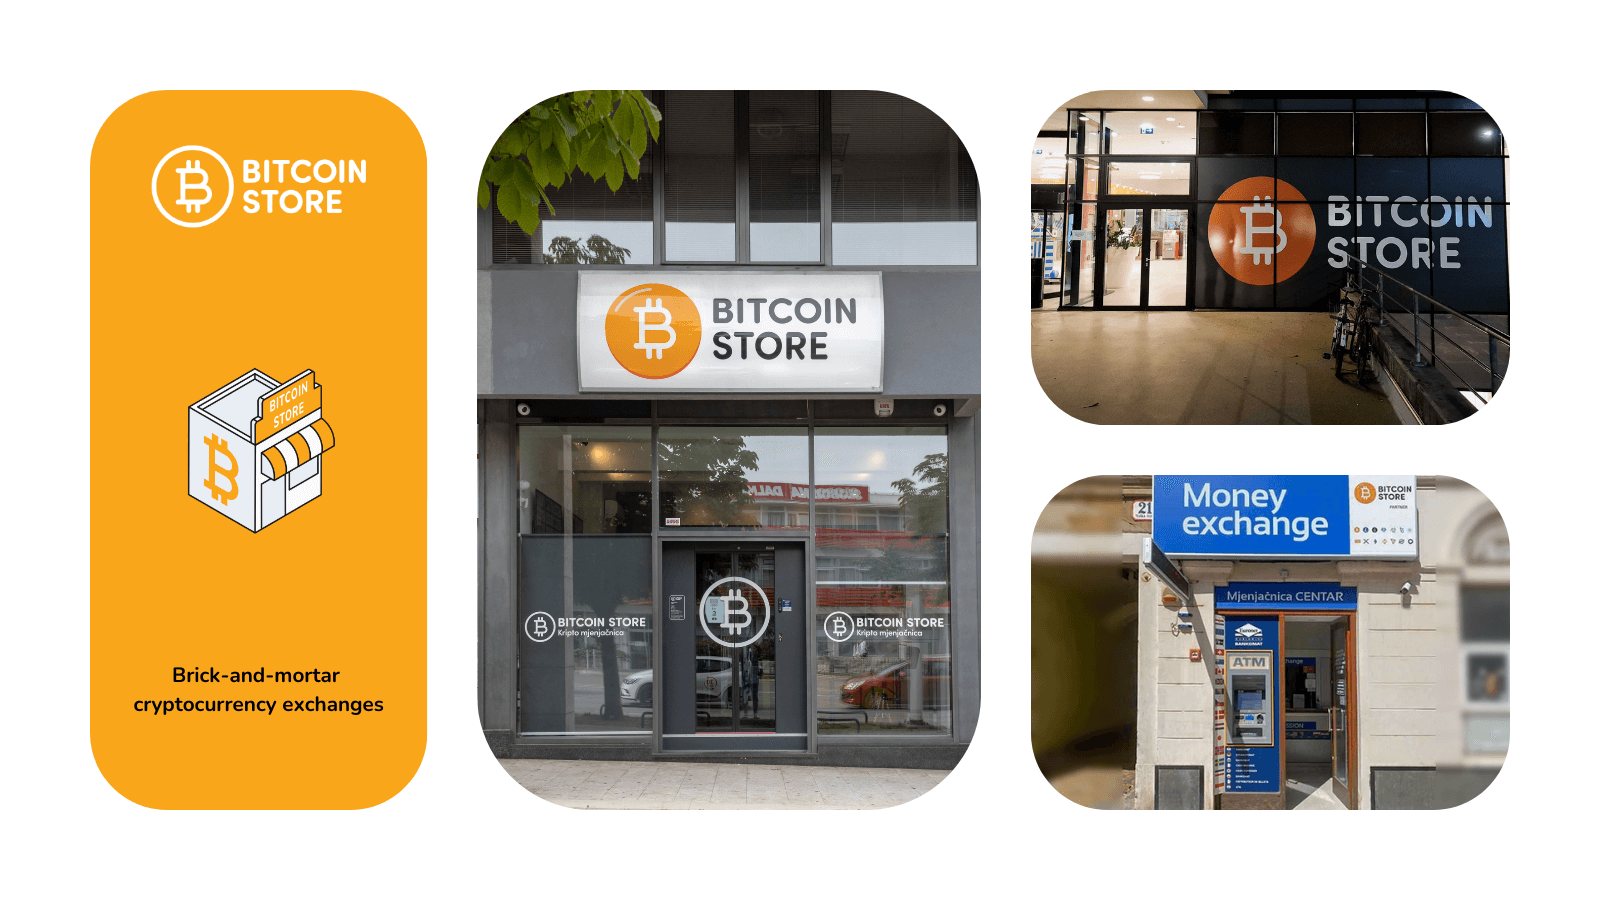 Bitcoin Store brick-and-mortar cryptocurrency exchanges on three locations.